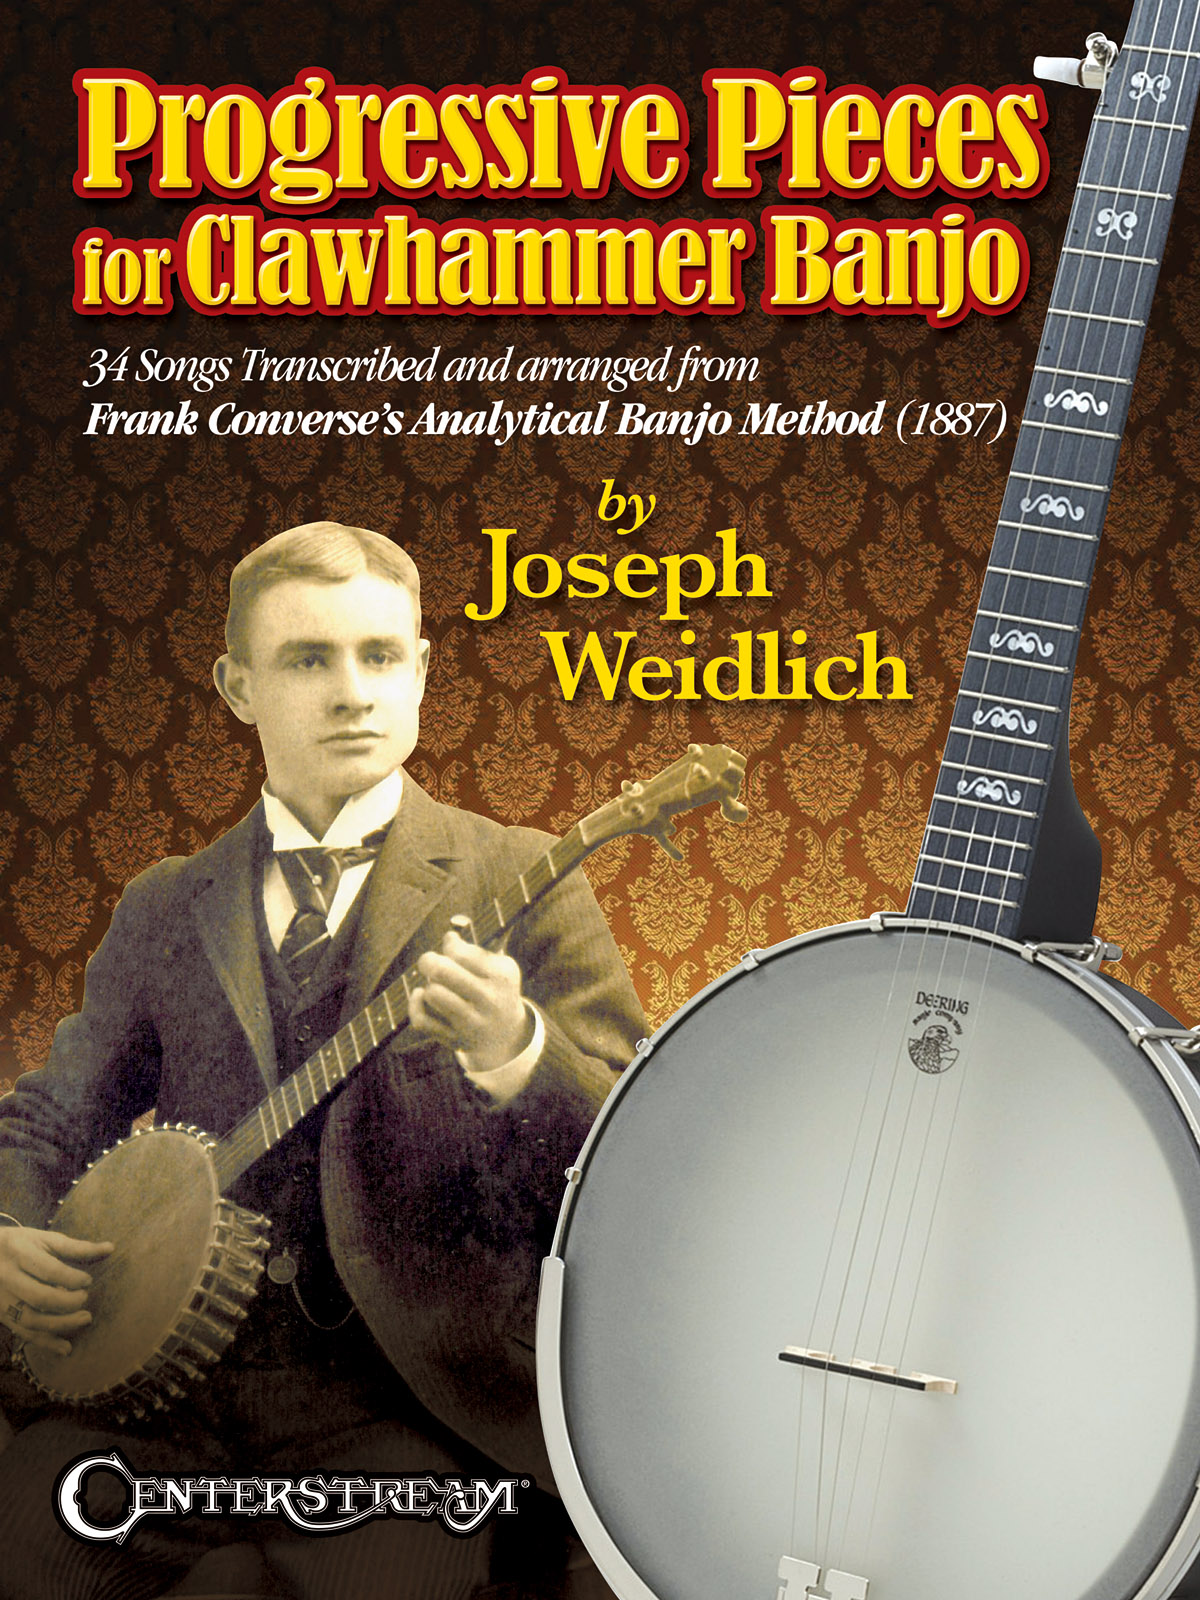 Progressive Pieces for Clawhammer Banjo - noty pro banjo